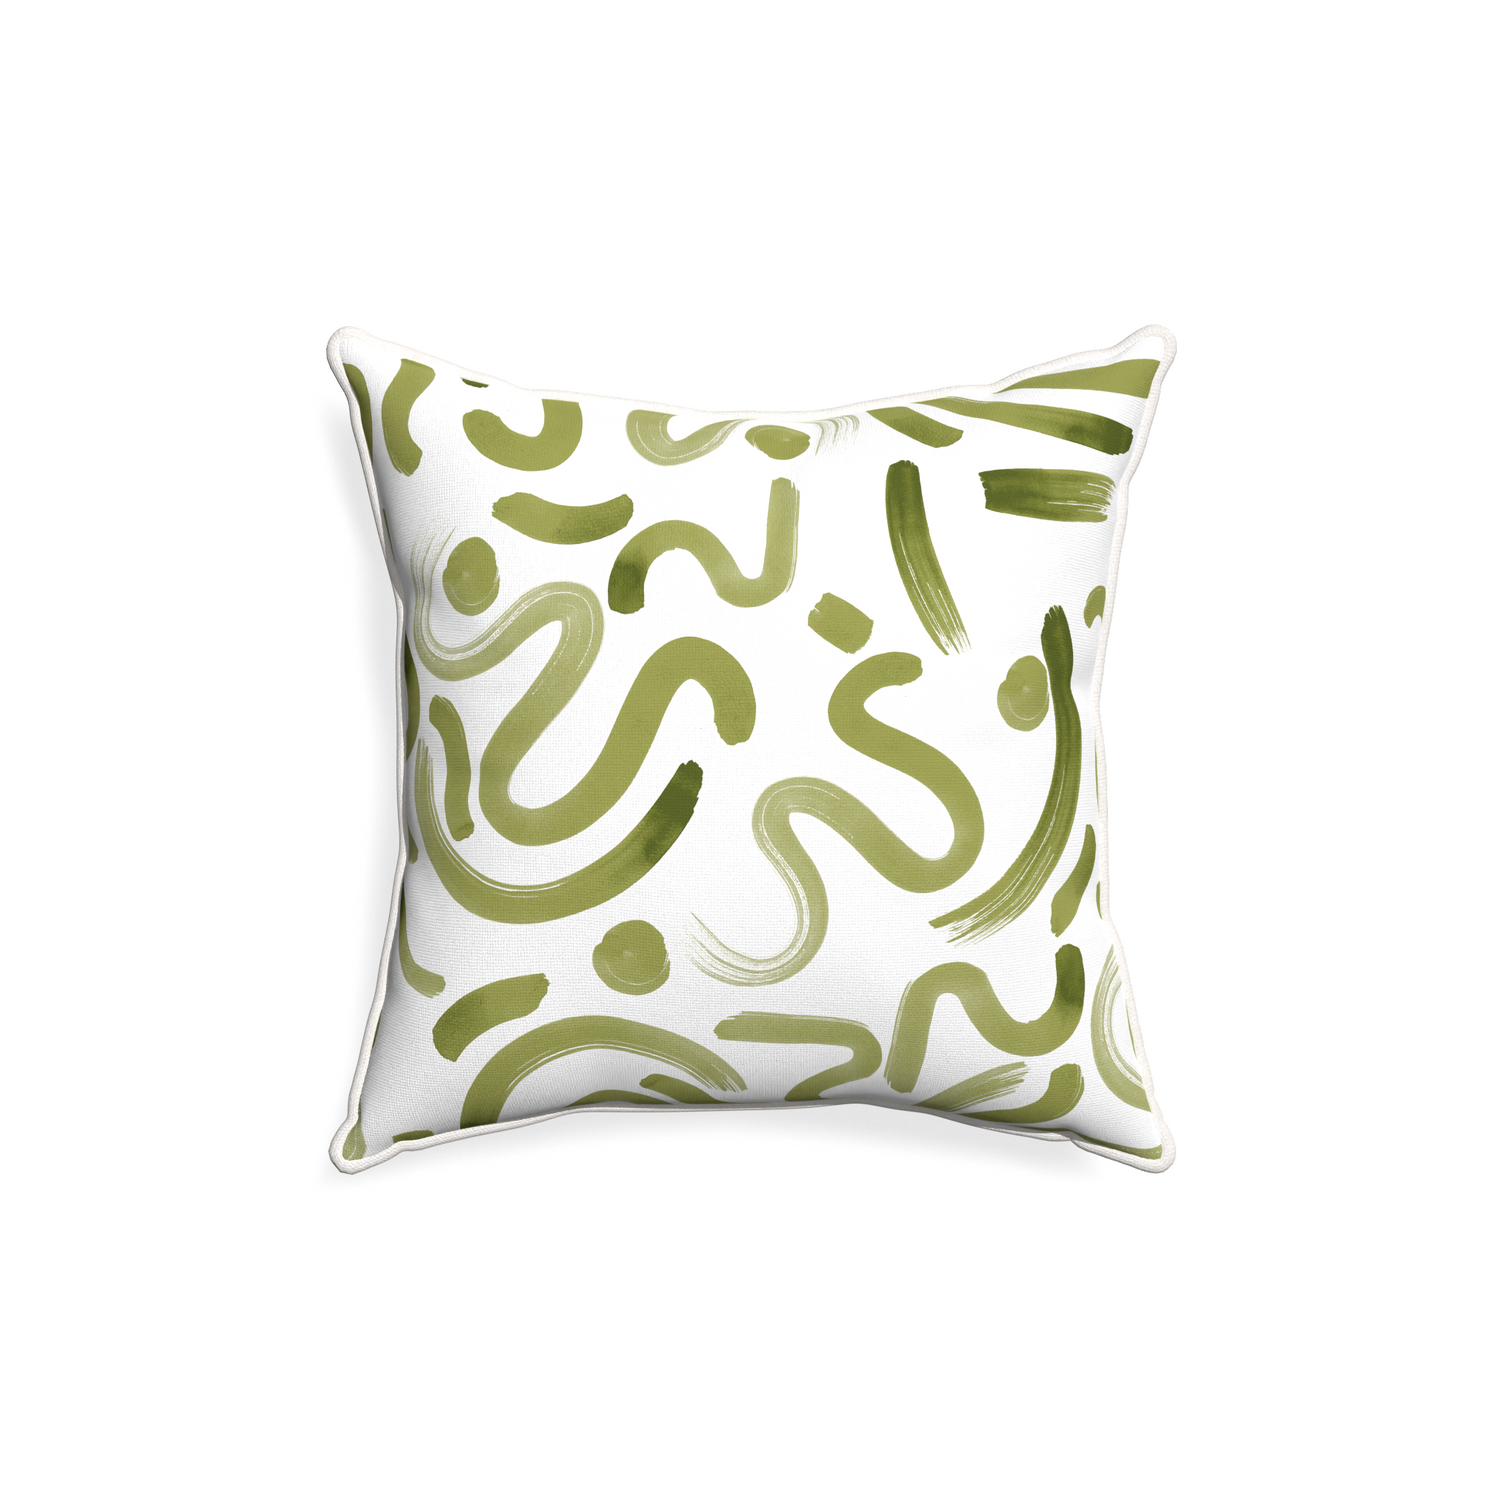 18-square hockney moss custom moss greenpillow with snow piping on white background